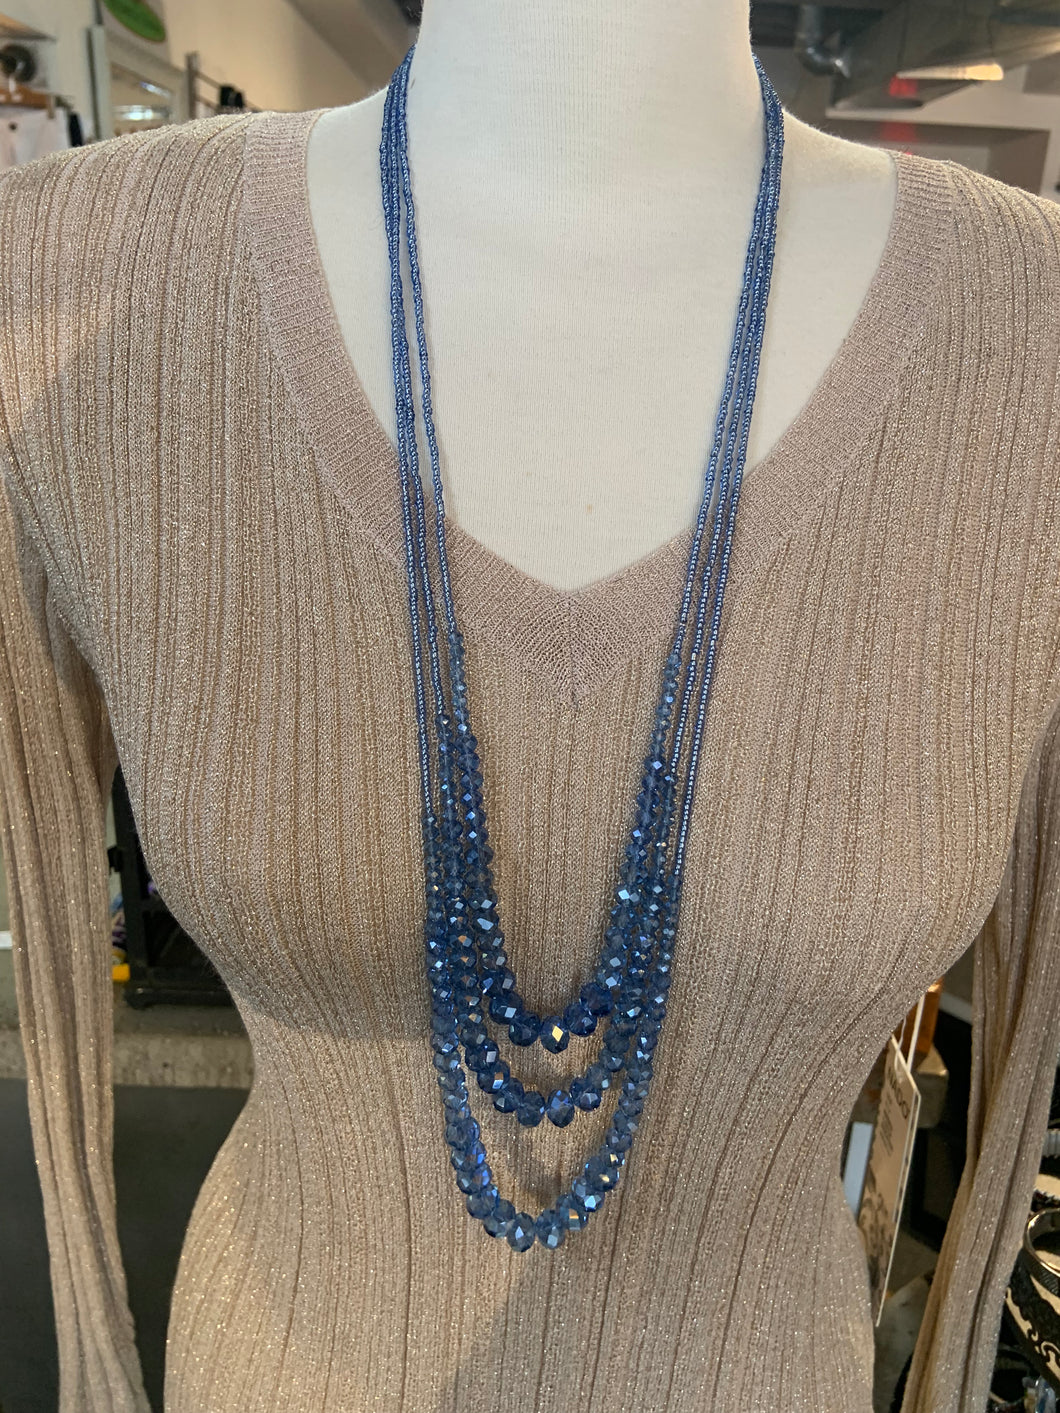 Blue Bead Multi-Strand Necklace (Only 1 Left!)